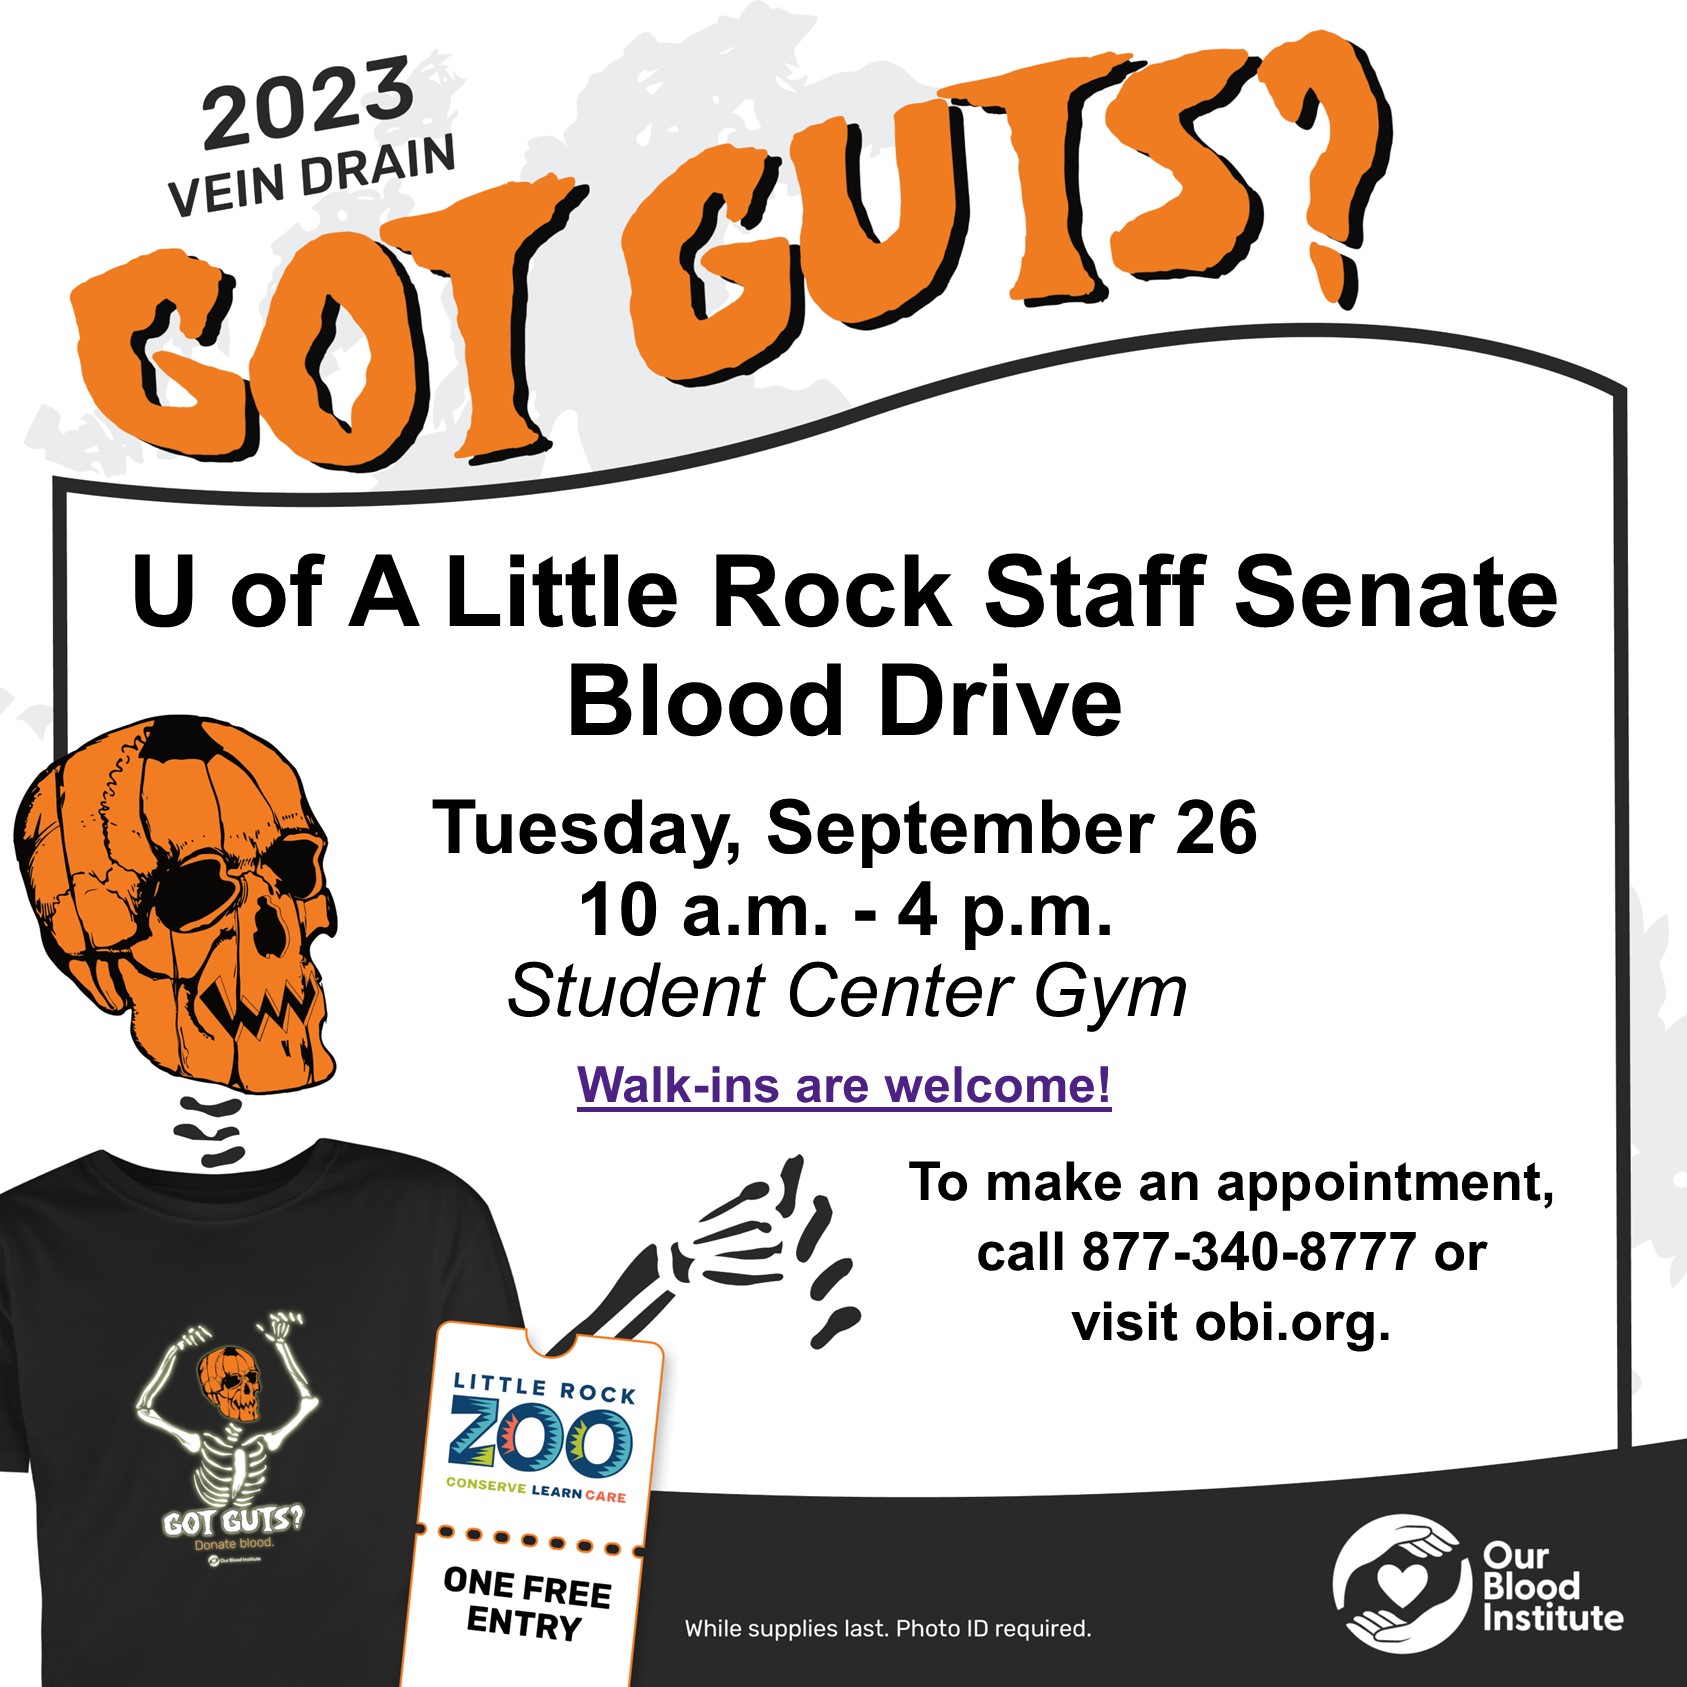 UA Little Rock Staff Senate will hold a Blood Drive from 10 a.m. to 4 p.m. Sept. 26.